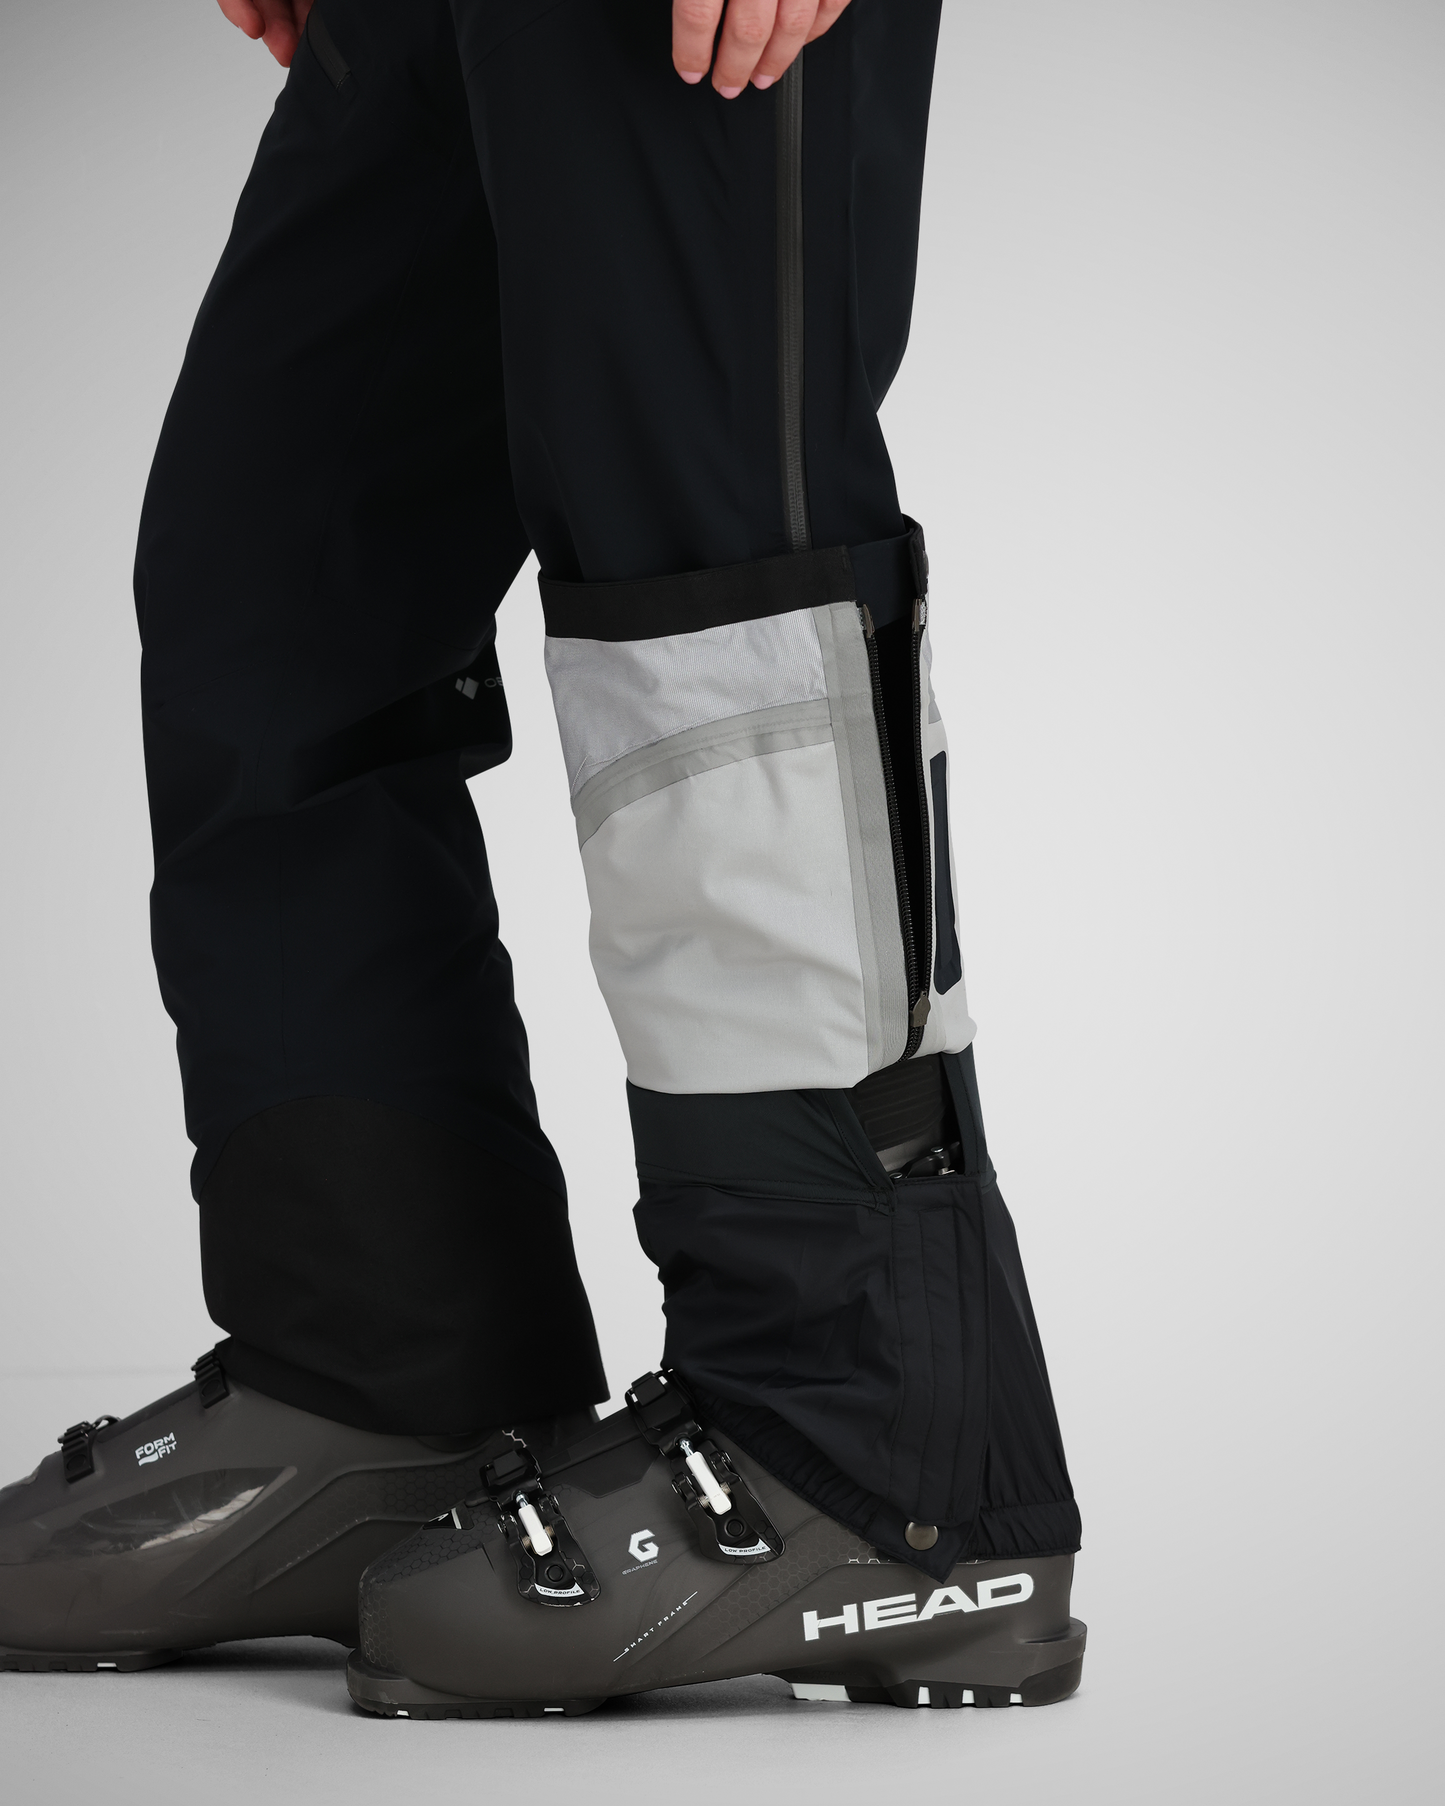 Water-resistant powder cuffs with gripper elastic | Protection from the elements was the prime goal of the design process of these cuffs. Boot gripping elastic ensures top-tier performance.